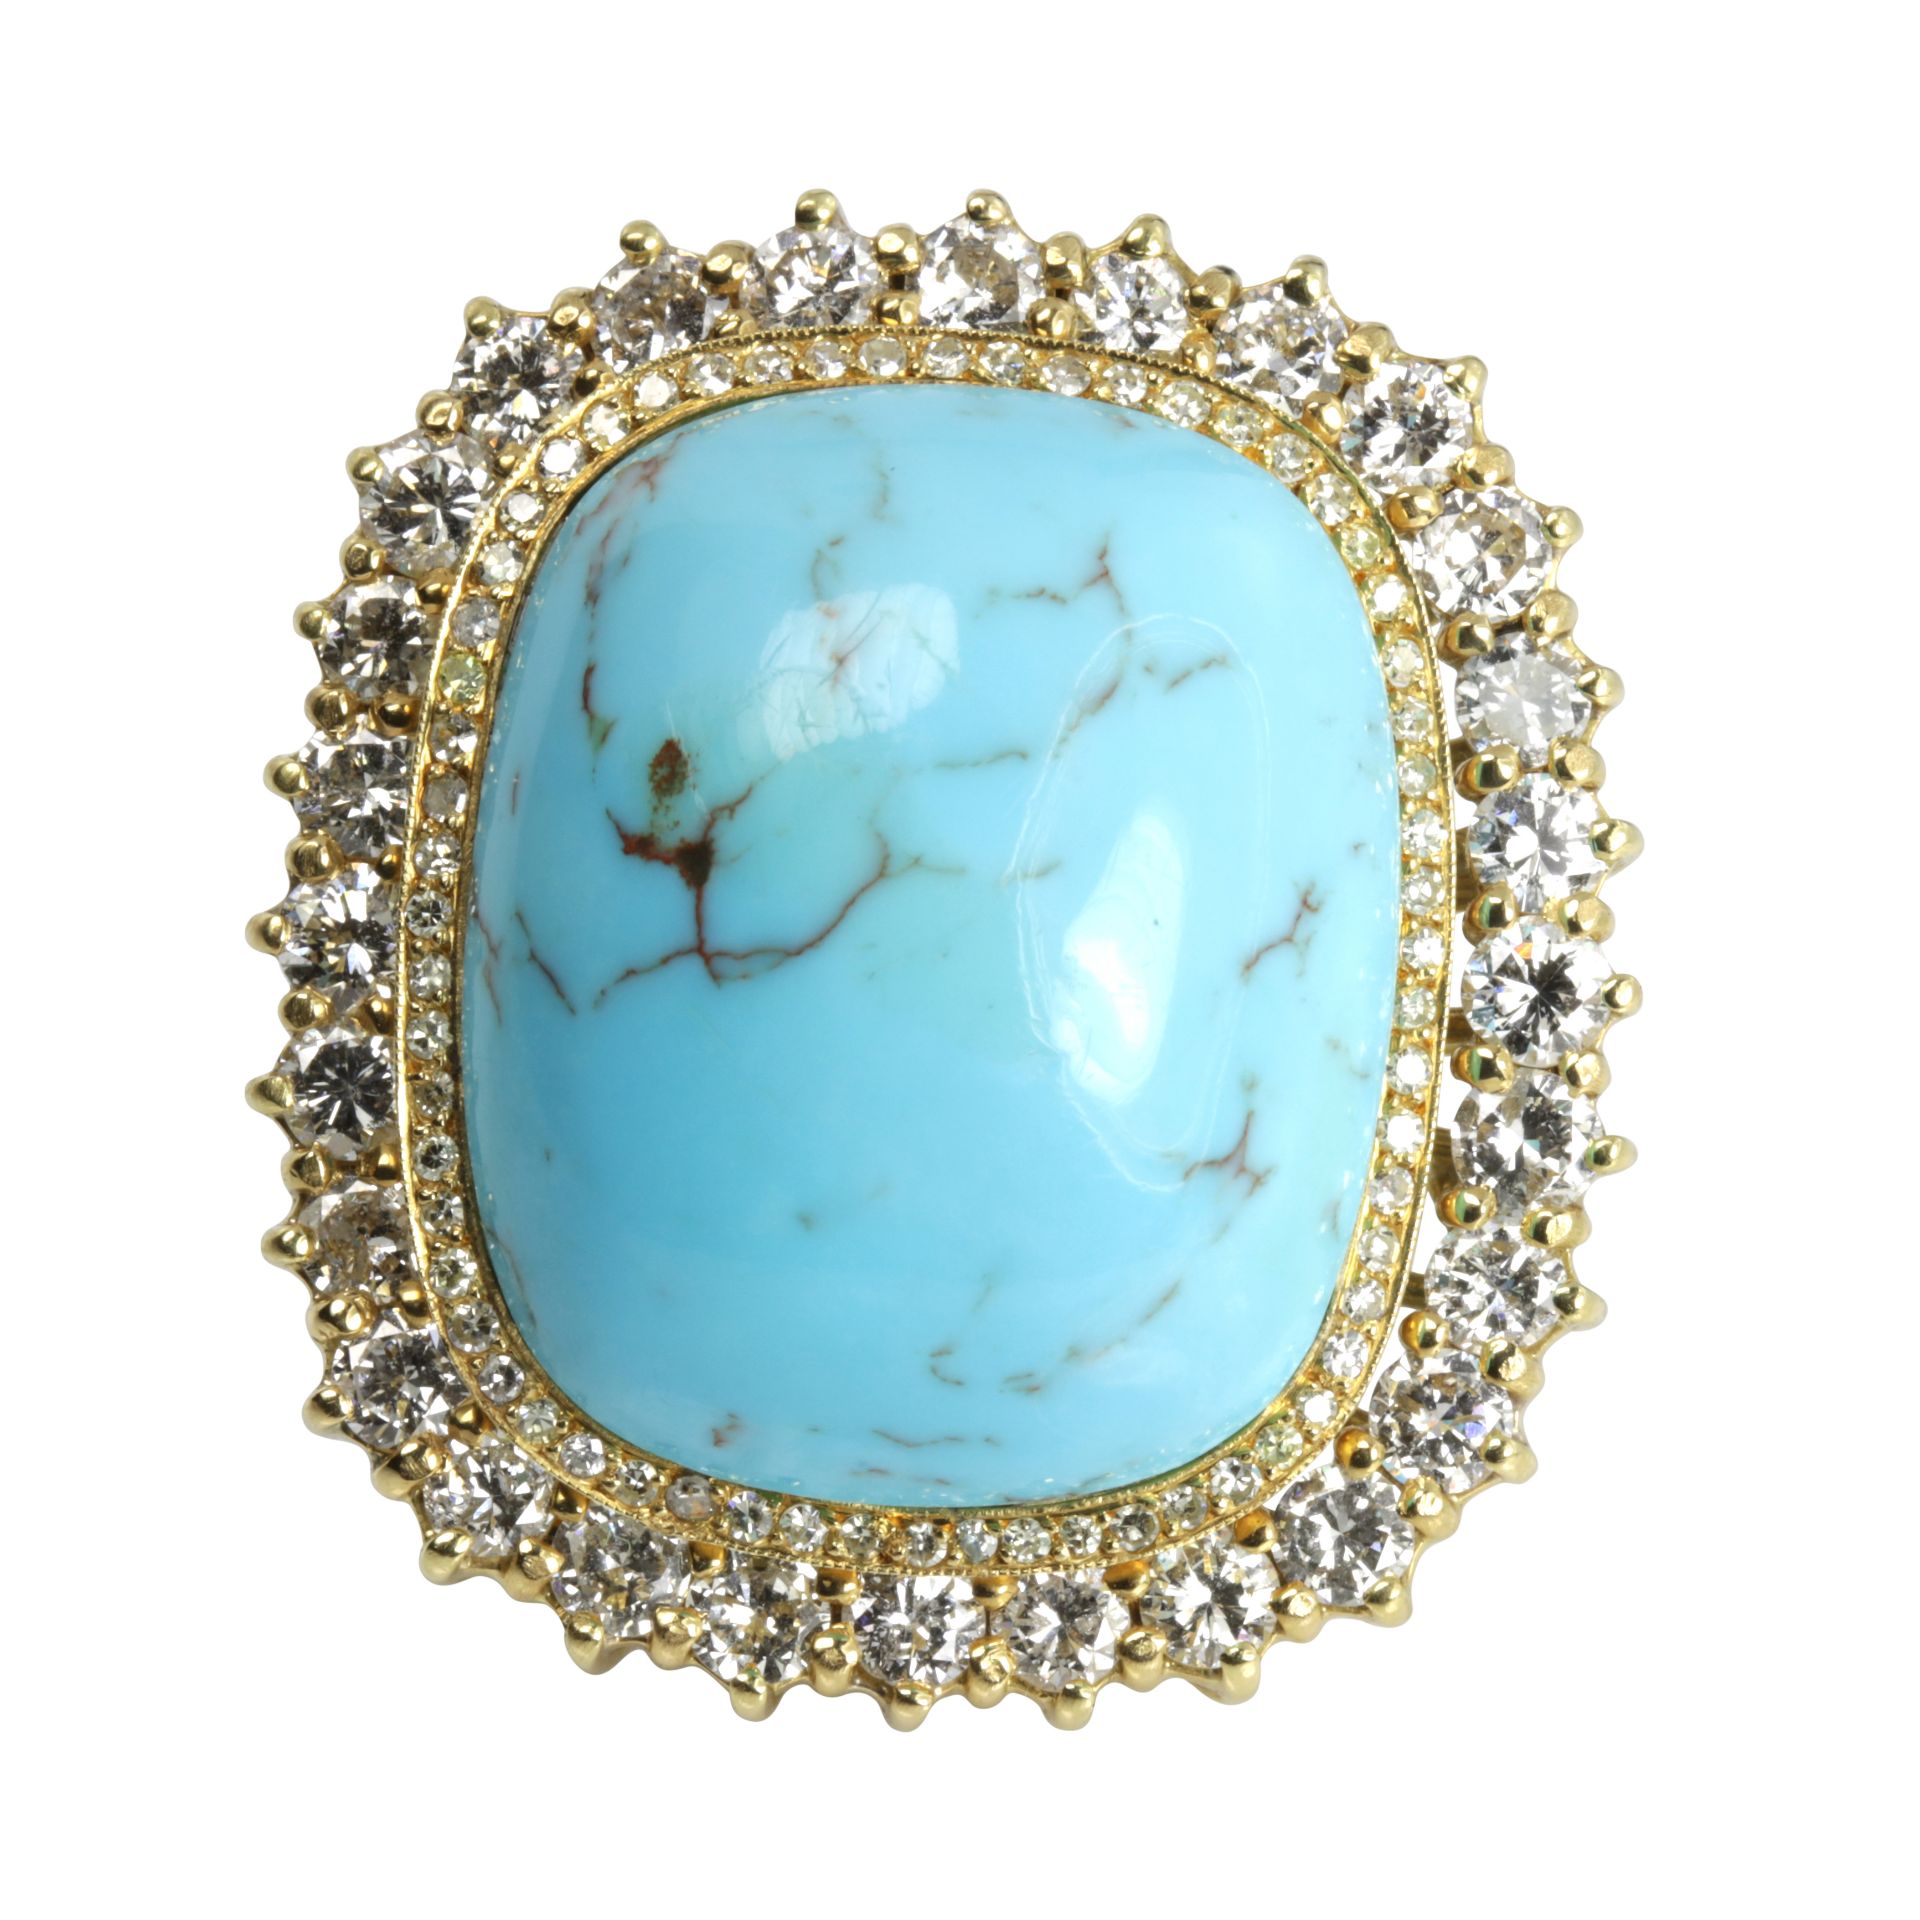 A TURQUOISE AND DIAMOND CLUSTER RING in 18ct yellow gold, set with a large, cushion shaped turquoise